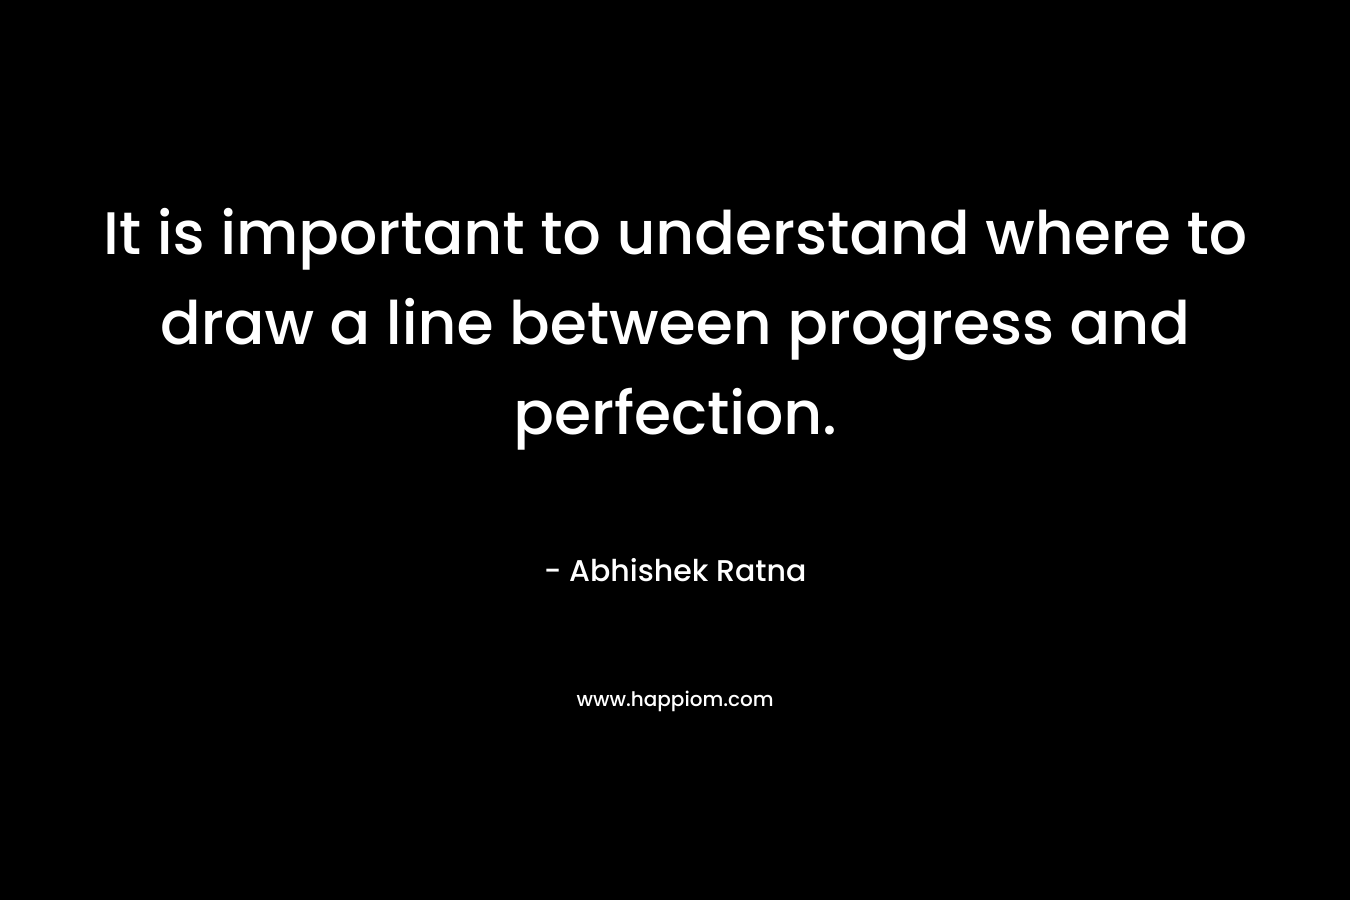 It is important to understand where to draw a line between progress and perfection. – Abhishek Ratna